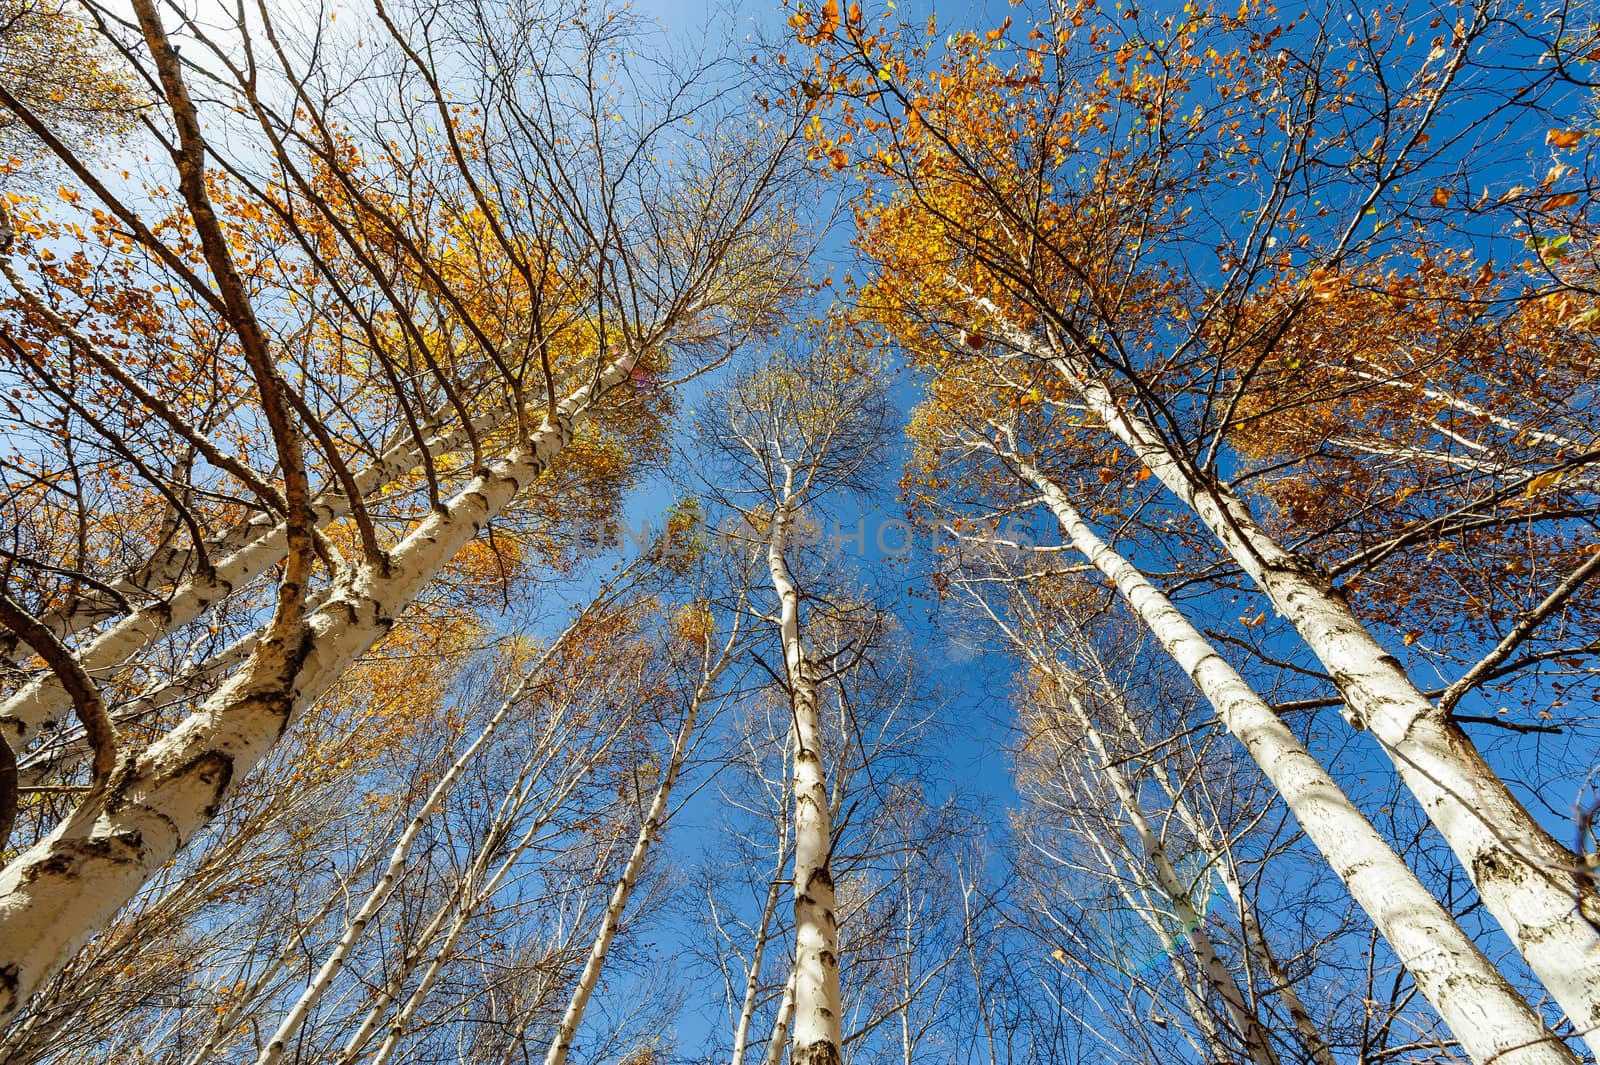 the birch treetop becomes golden when Autumn came in Bashang prairie of Inner Mongolia.